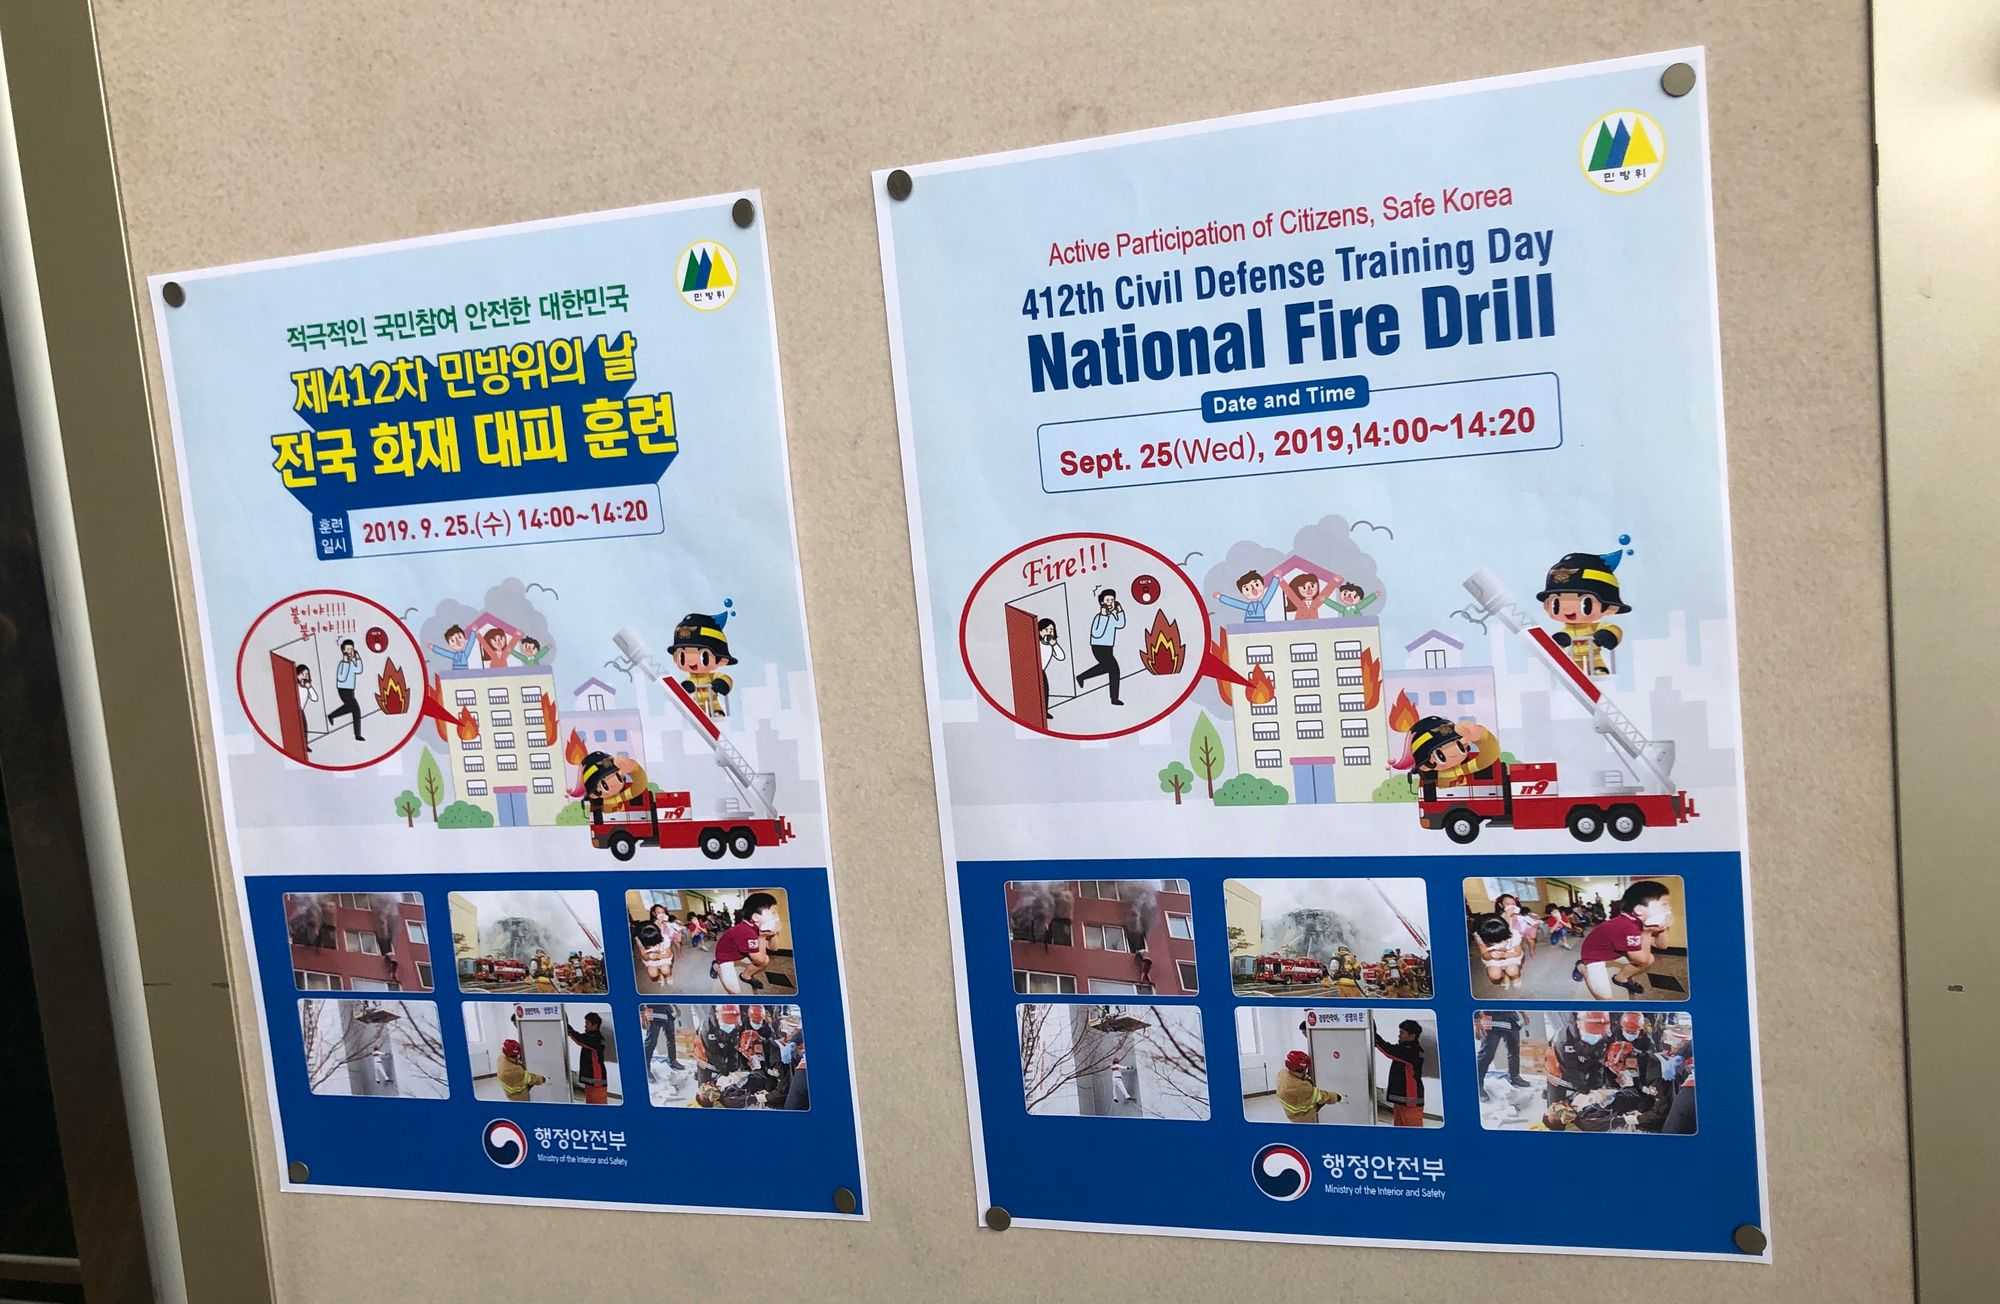 National Fire Drill (Image by author)